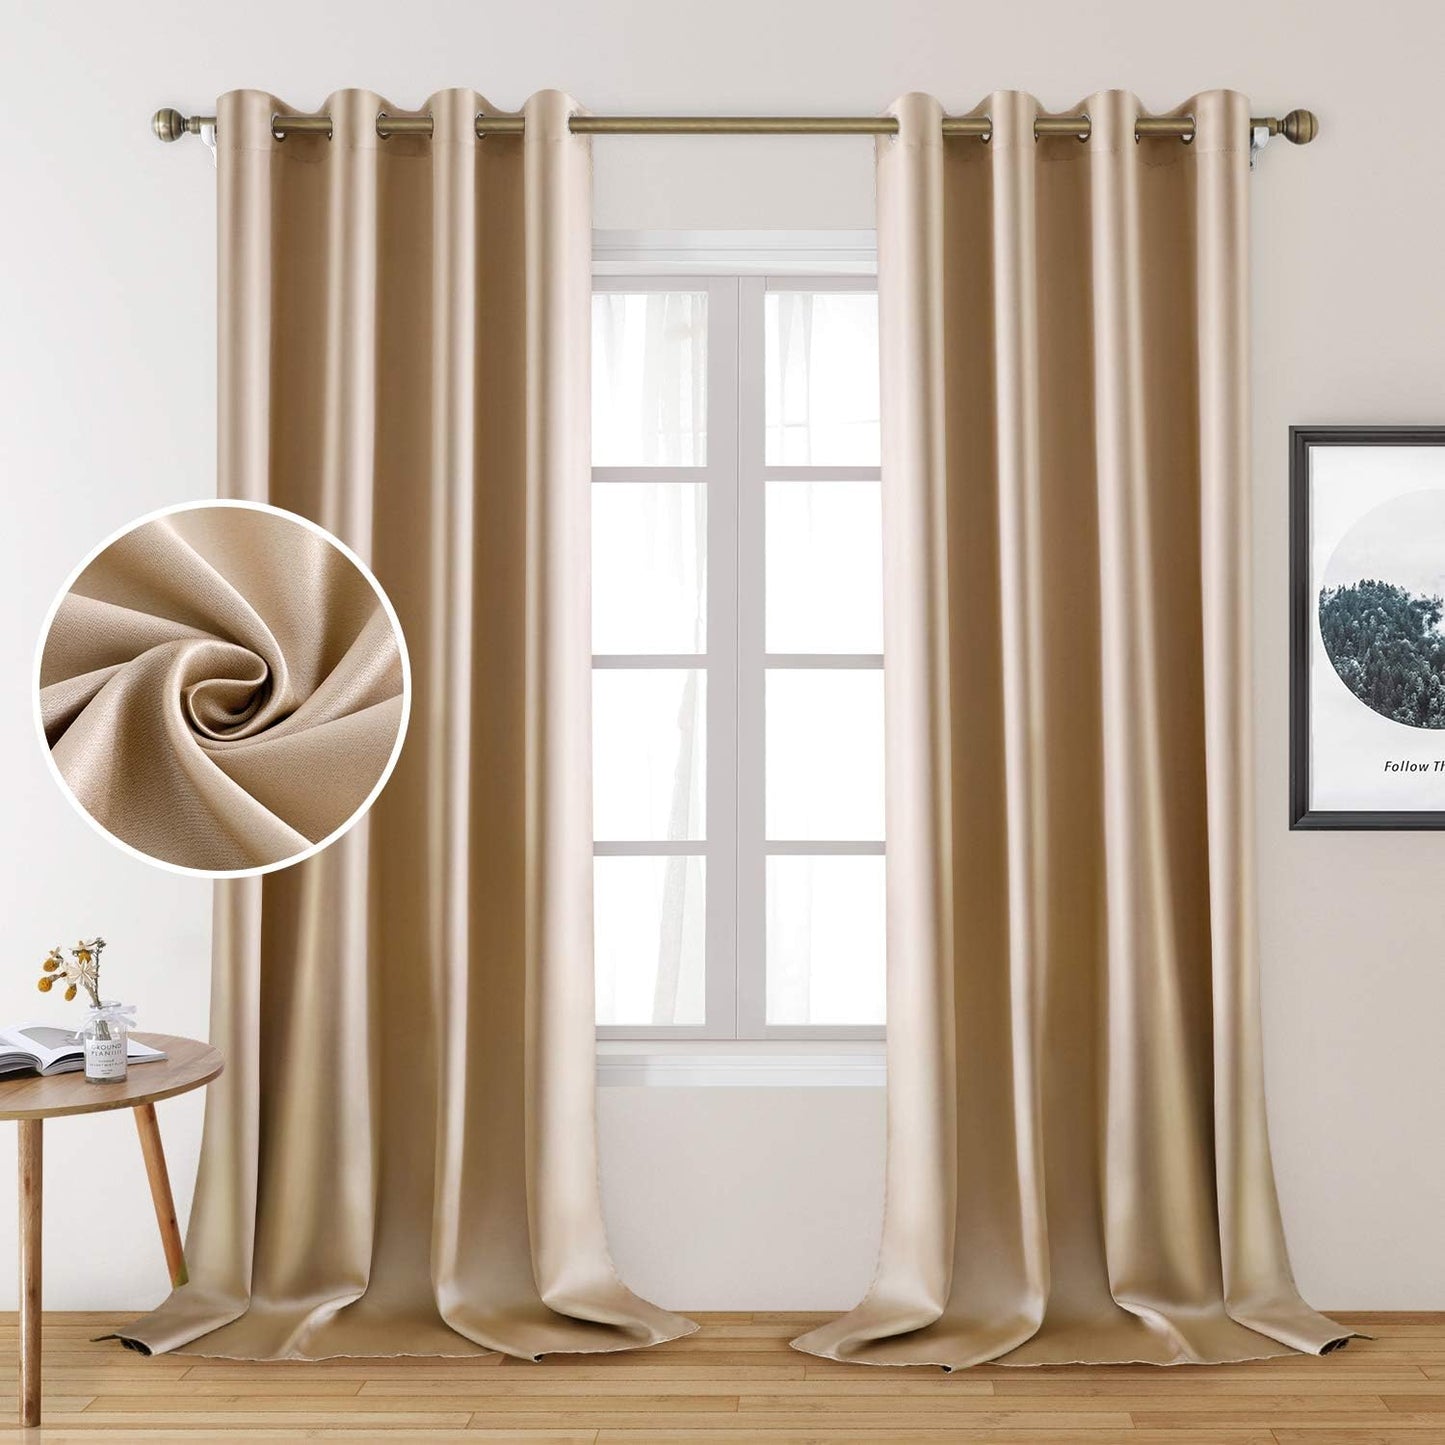 HOMEIDEAS Gold Blackout Curtains, Faux Silk for Bedroom 52 X 84 Inch Room Darkening Satin Thermal Insulated Drapes for Window, Indoor, Living Room, 2 Panels  HOMEIDEAS Beige/Champagne Gold 52" X 108" 